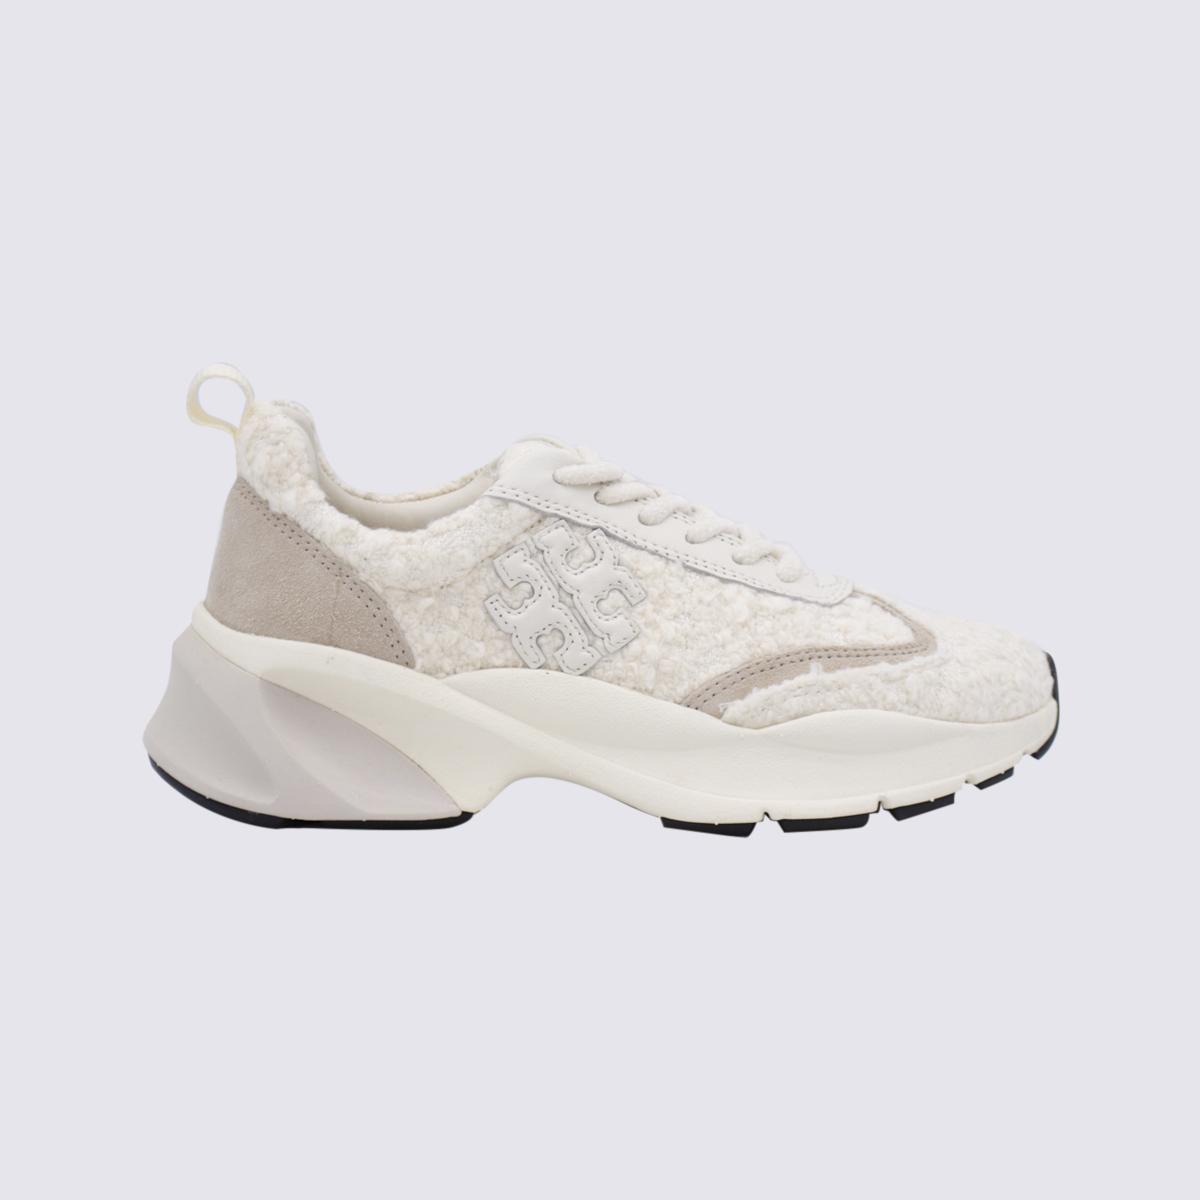 Tory Burch Sneakers in White | Lyst